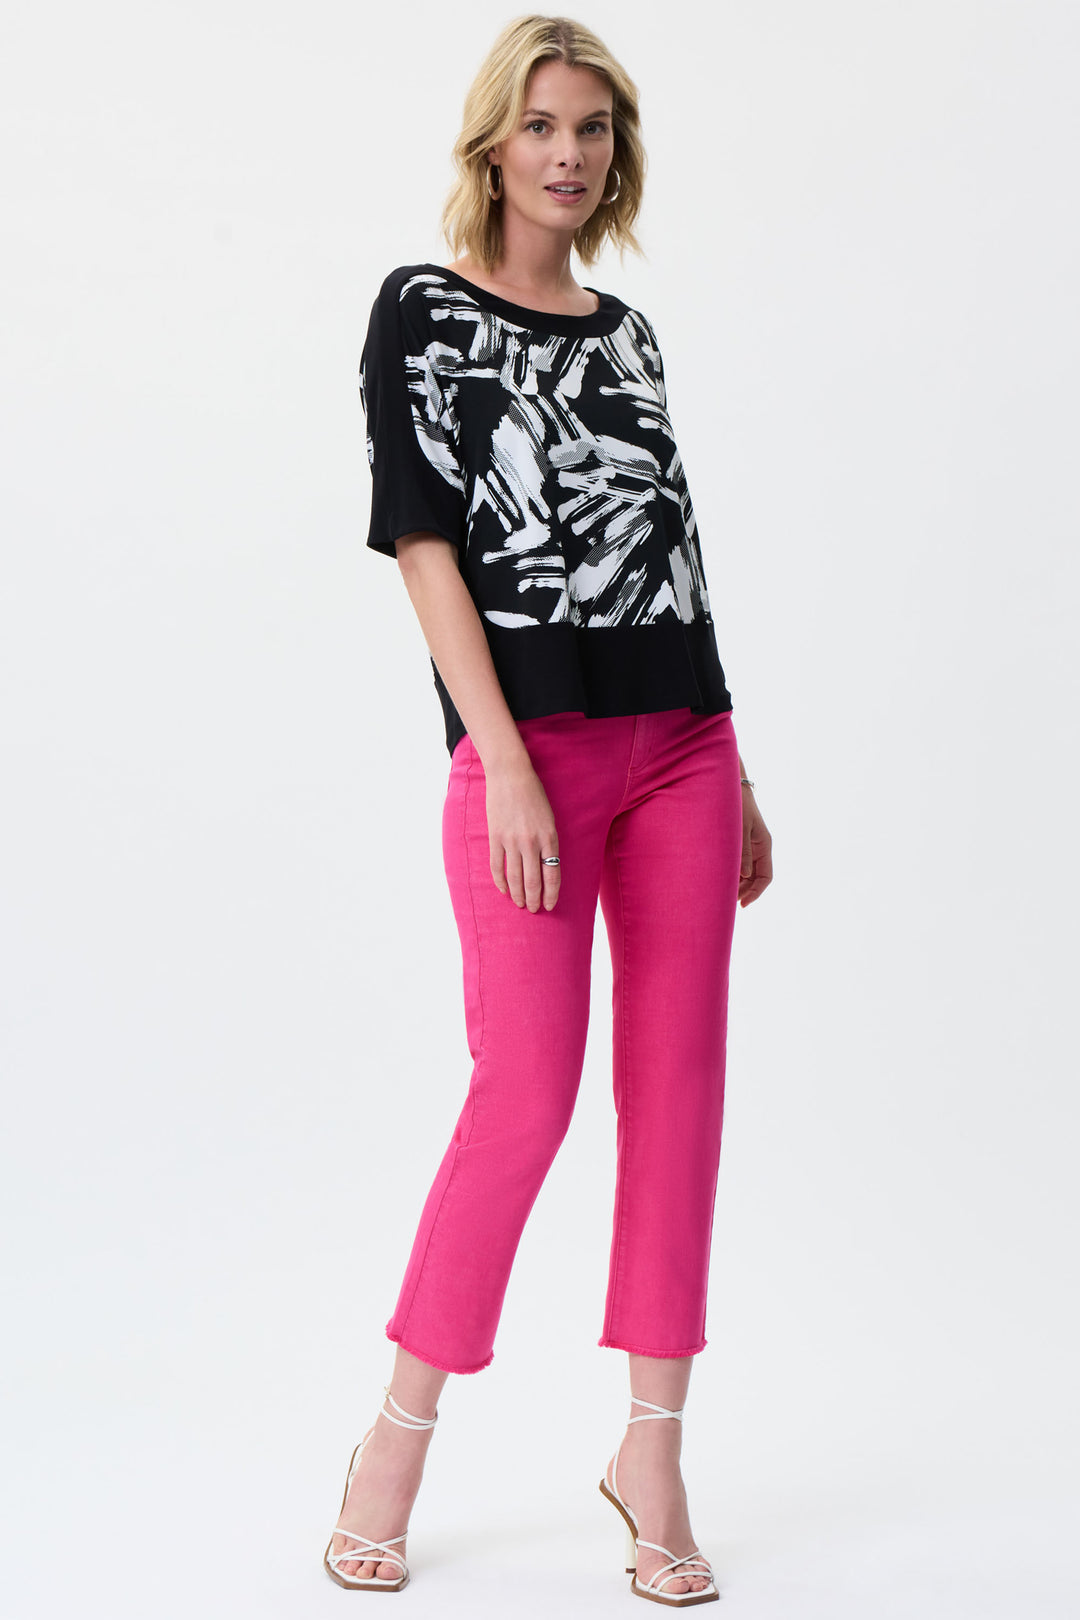 JOSEPH RIBKOFF SPRING 2023 women's casual colourful slim cropped jeans with frayed hem - dazzle pink